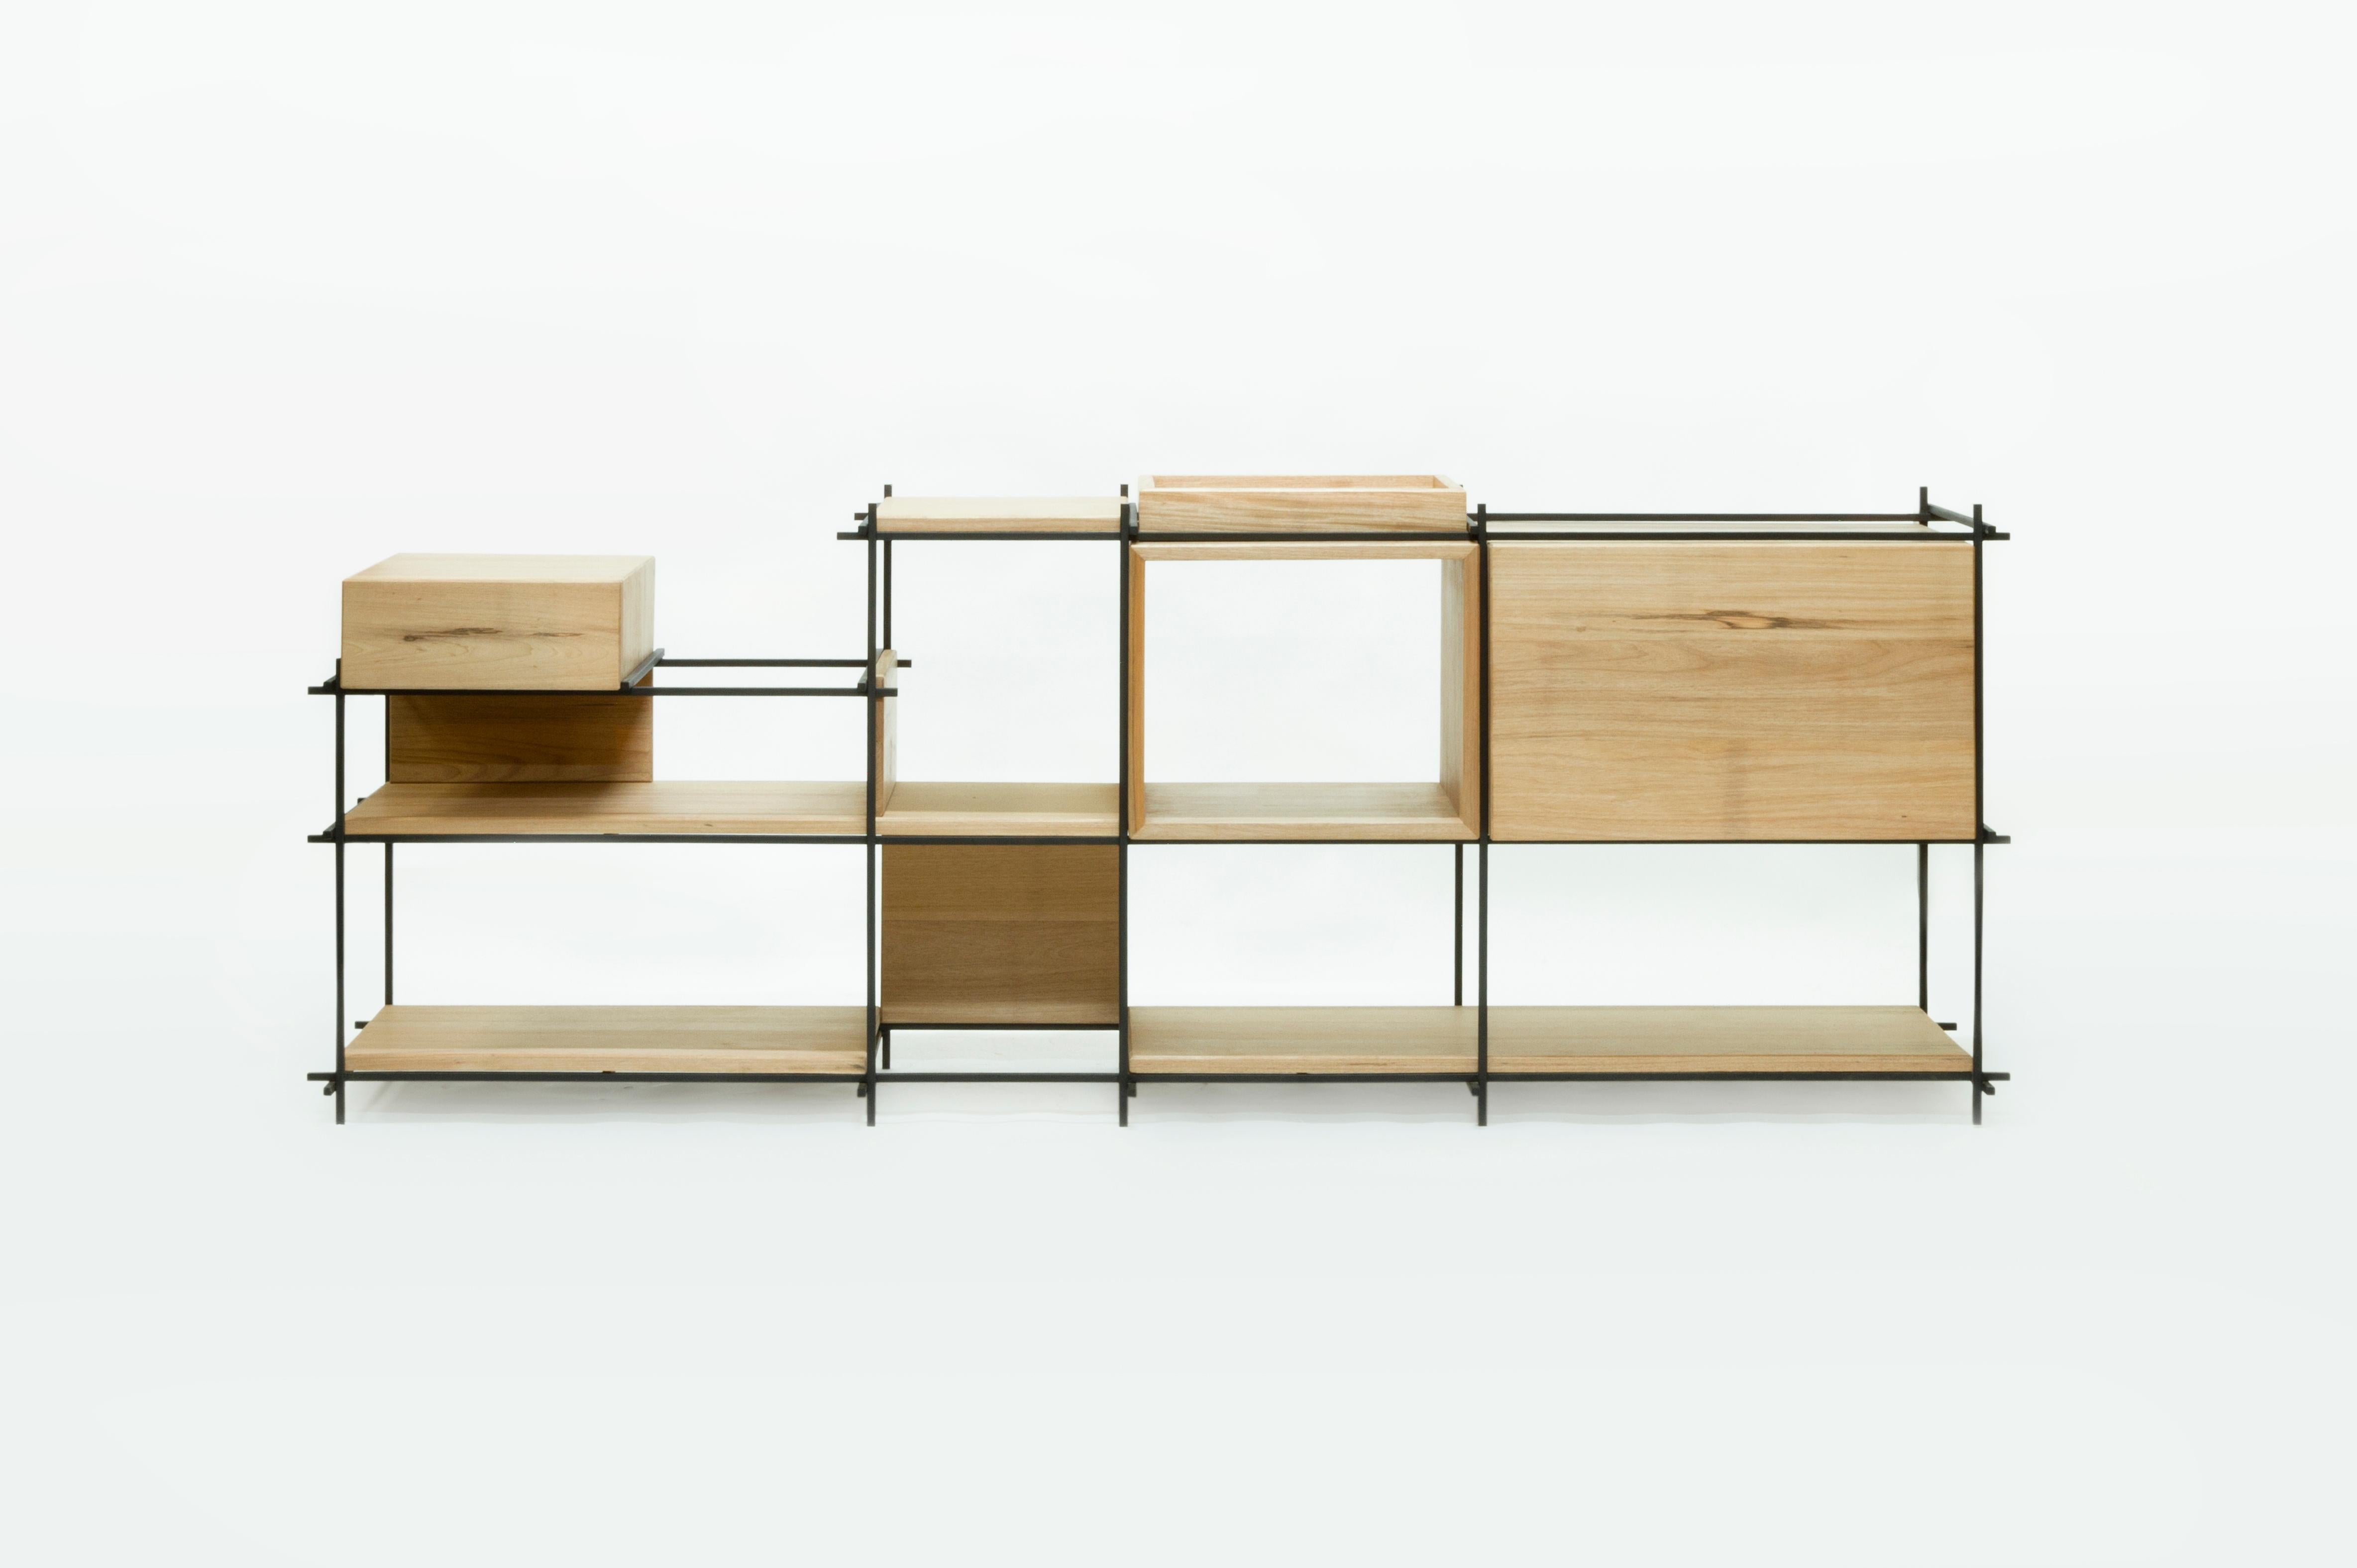 This sideboard can also be at the same time a buffet and a bookshelf. The 